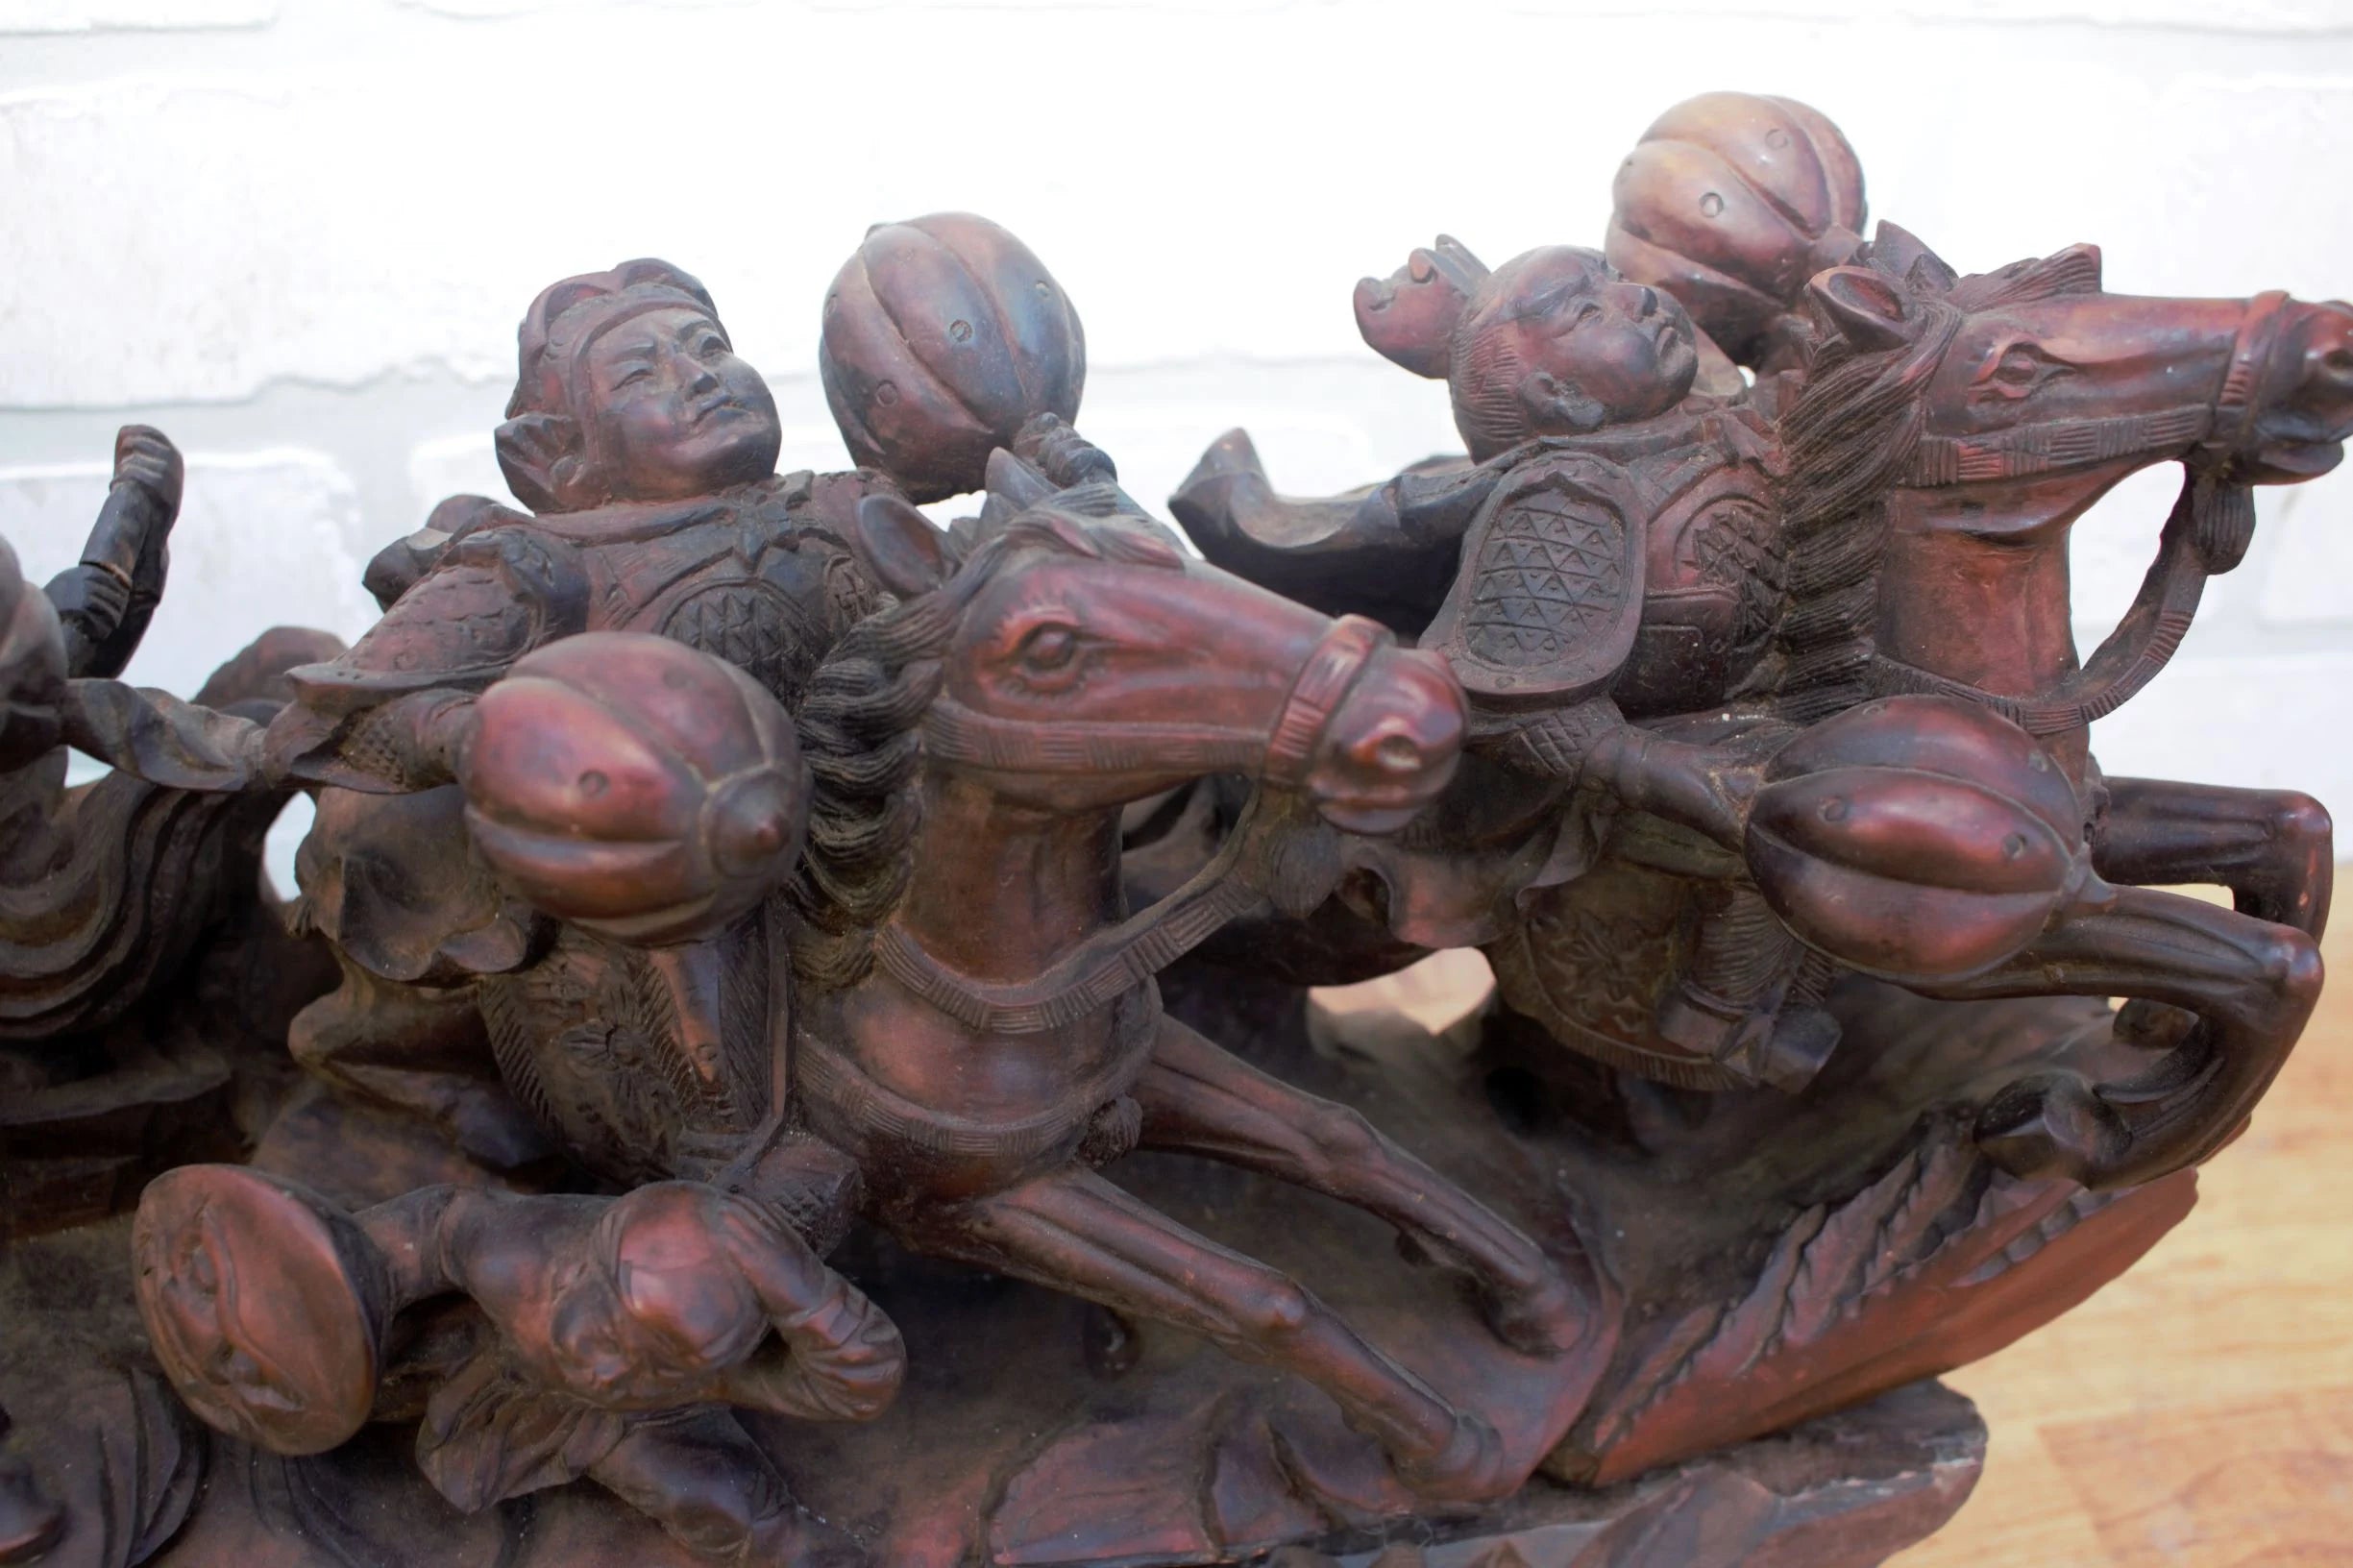 Carved Statue of Asian Warriors on Wood Base - 2 pieces